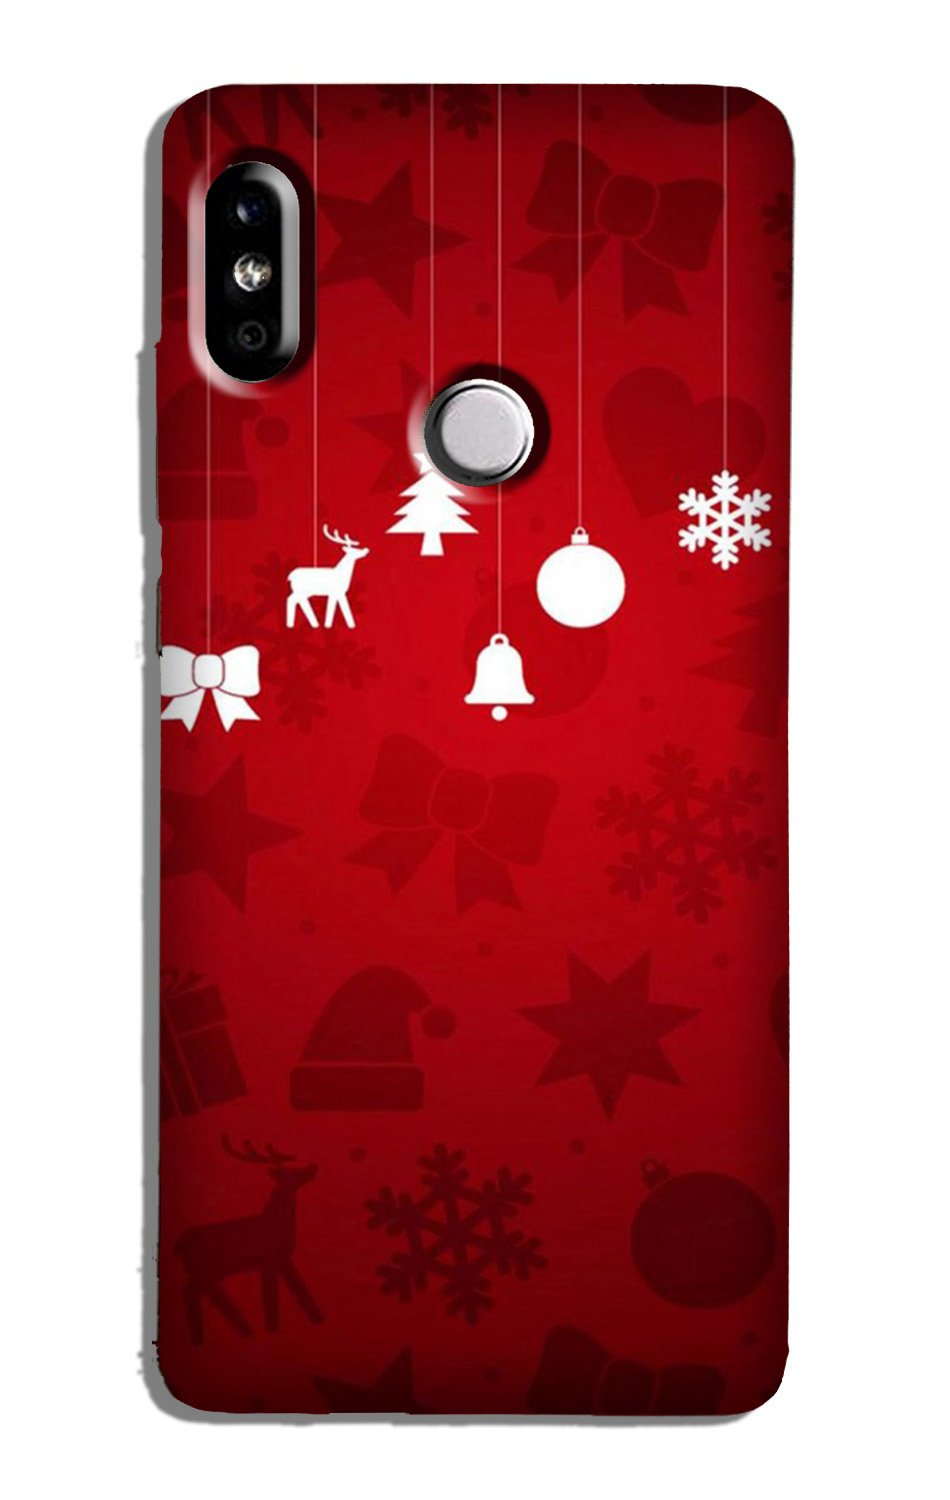 Christmas Case for Redmi Note 5 Pro